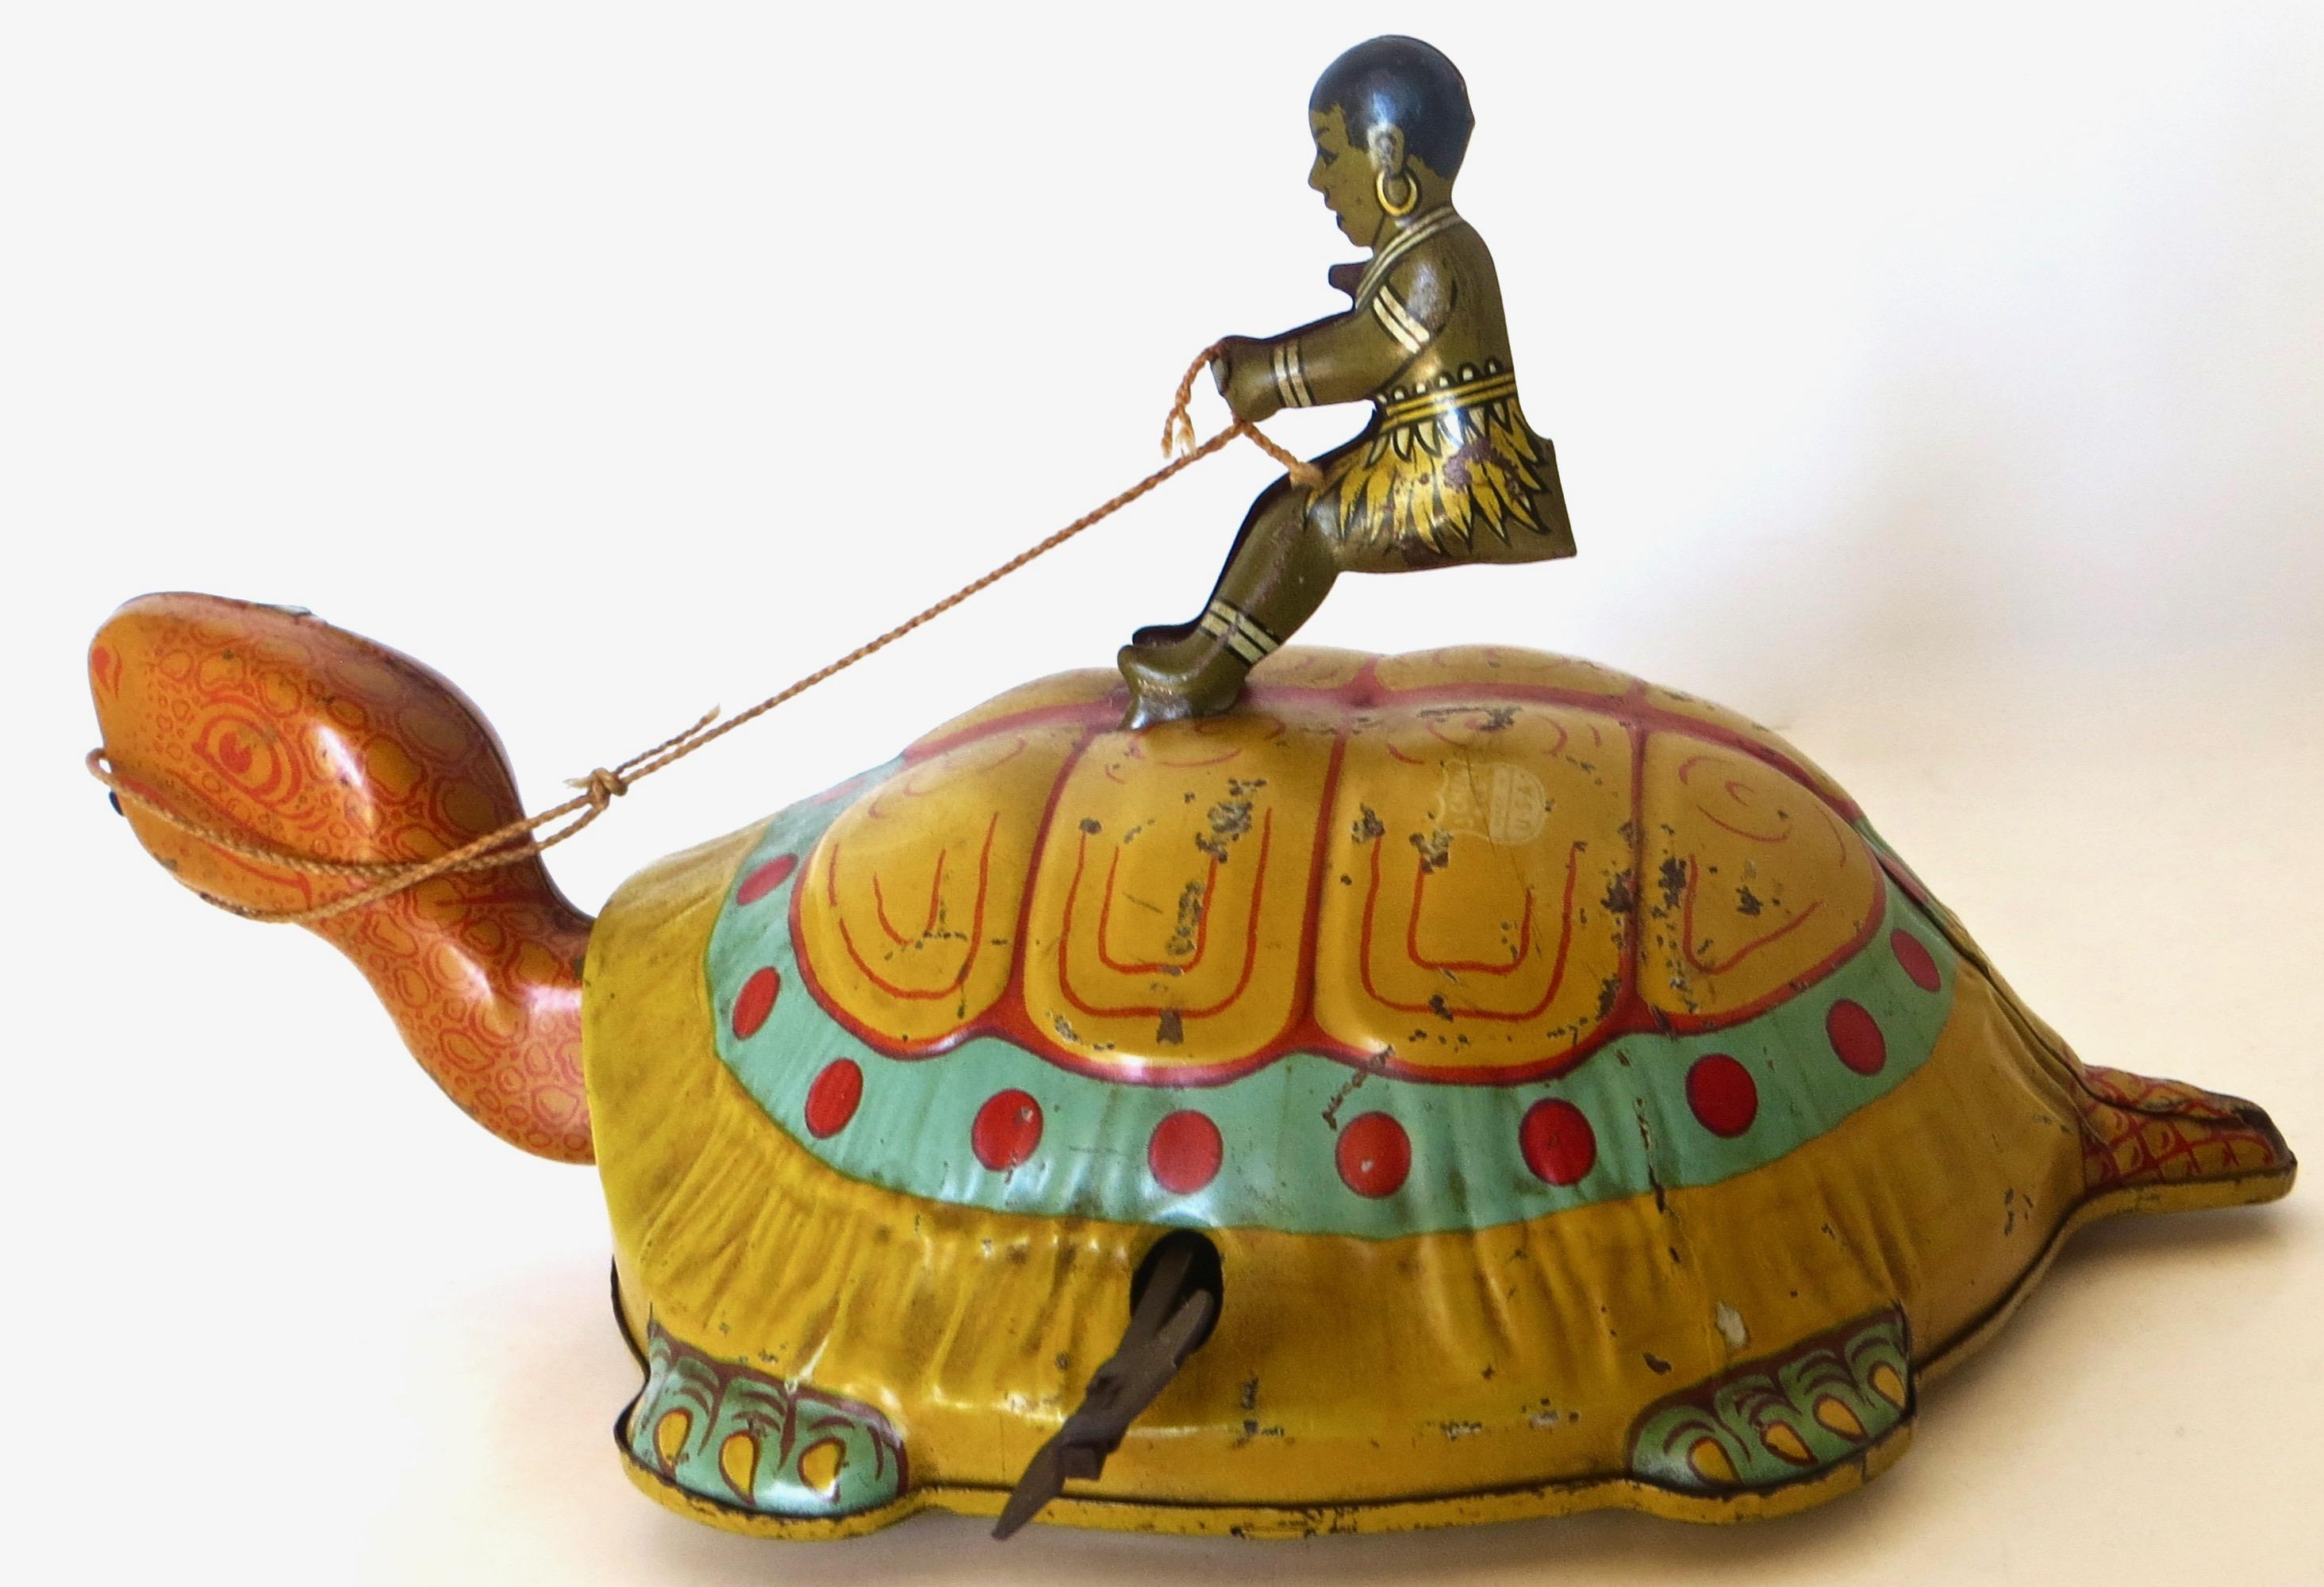 By J. Chein, circa 1930, this tin lithographed and hand painted American tin wind-up toy is all original and in working order. There are a few scratches here and there (from normal play and use); but for a nearly 100 year old toy, it is in very good